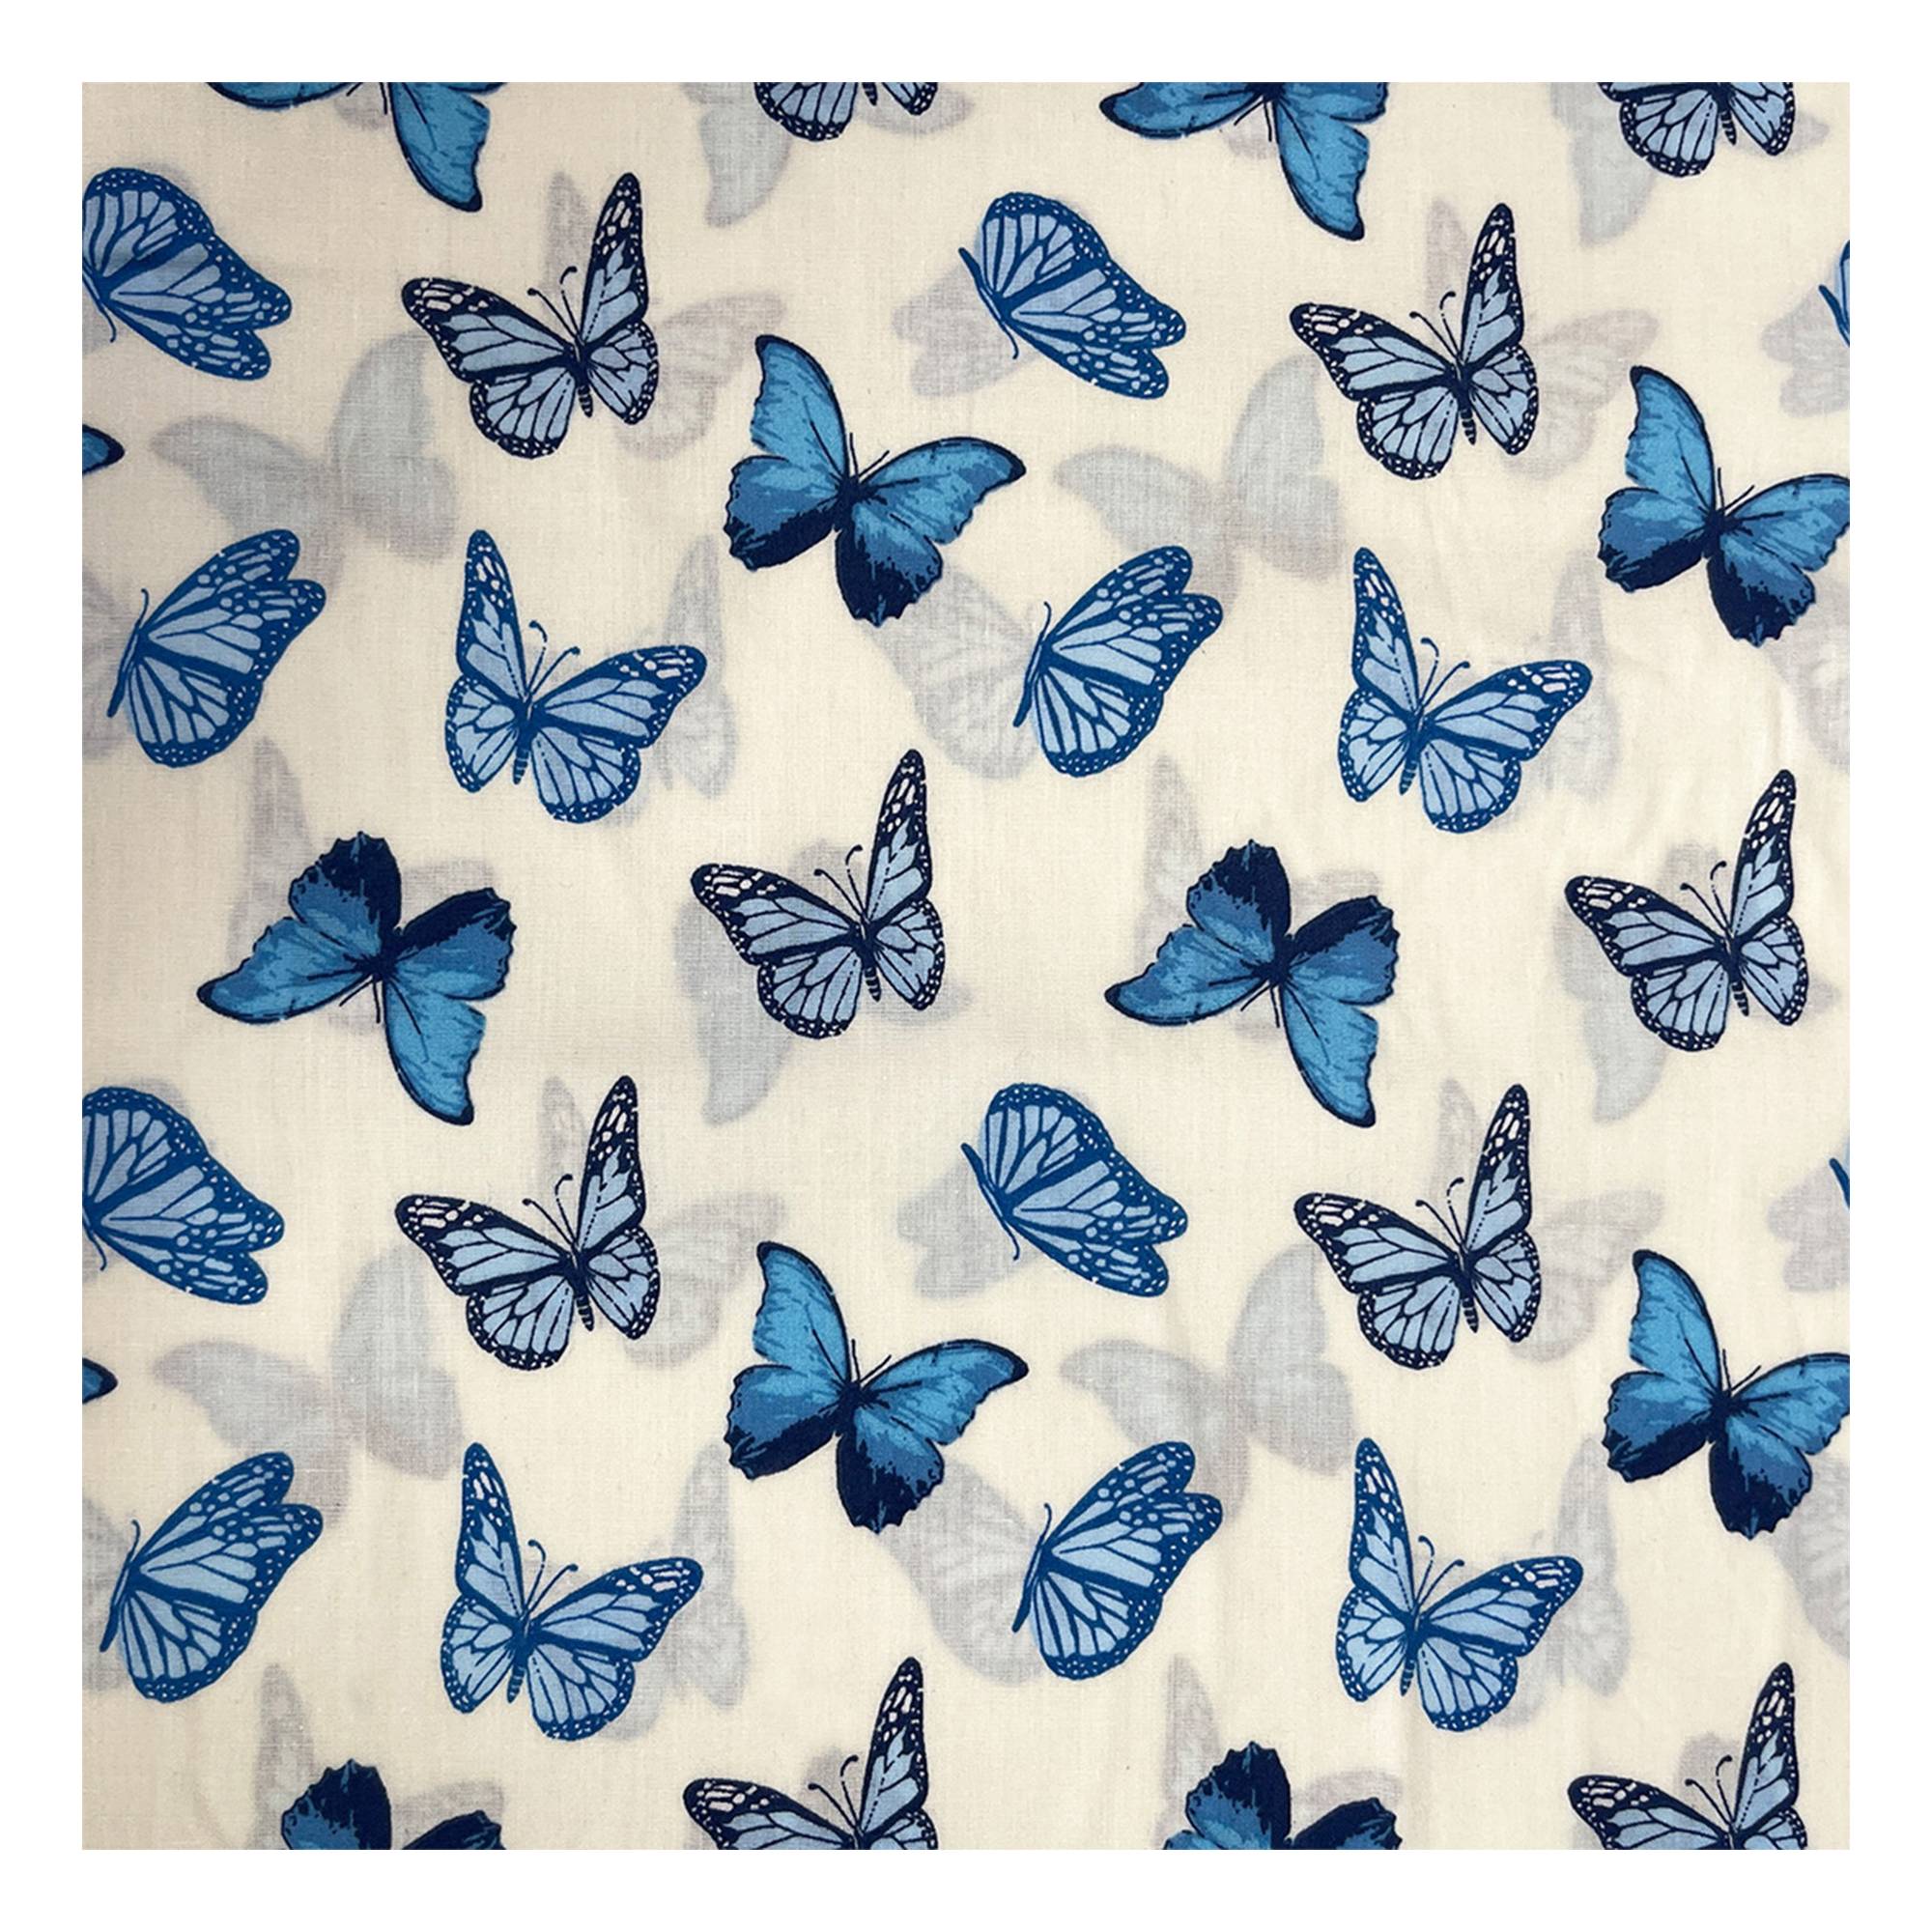 Blue Butterflies Polycotton Fabric by the Metre